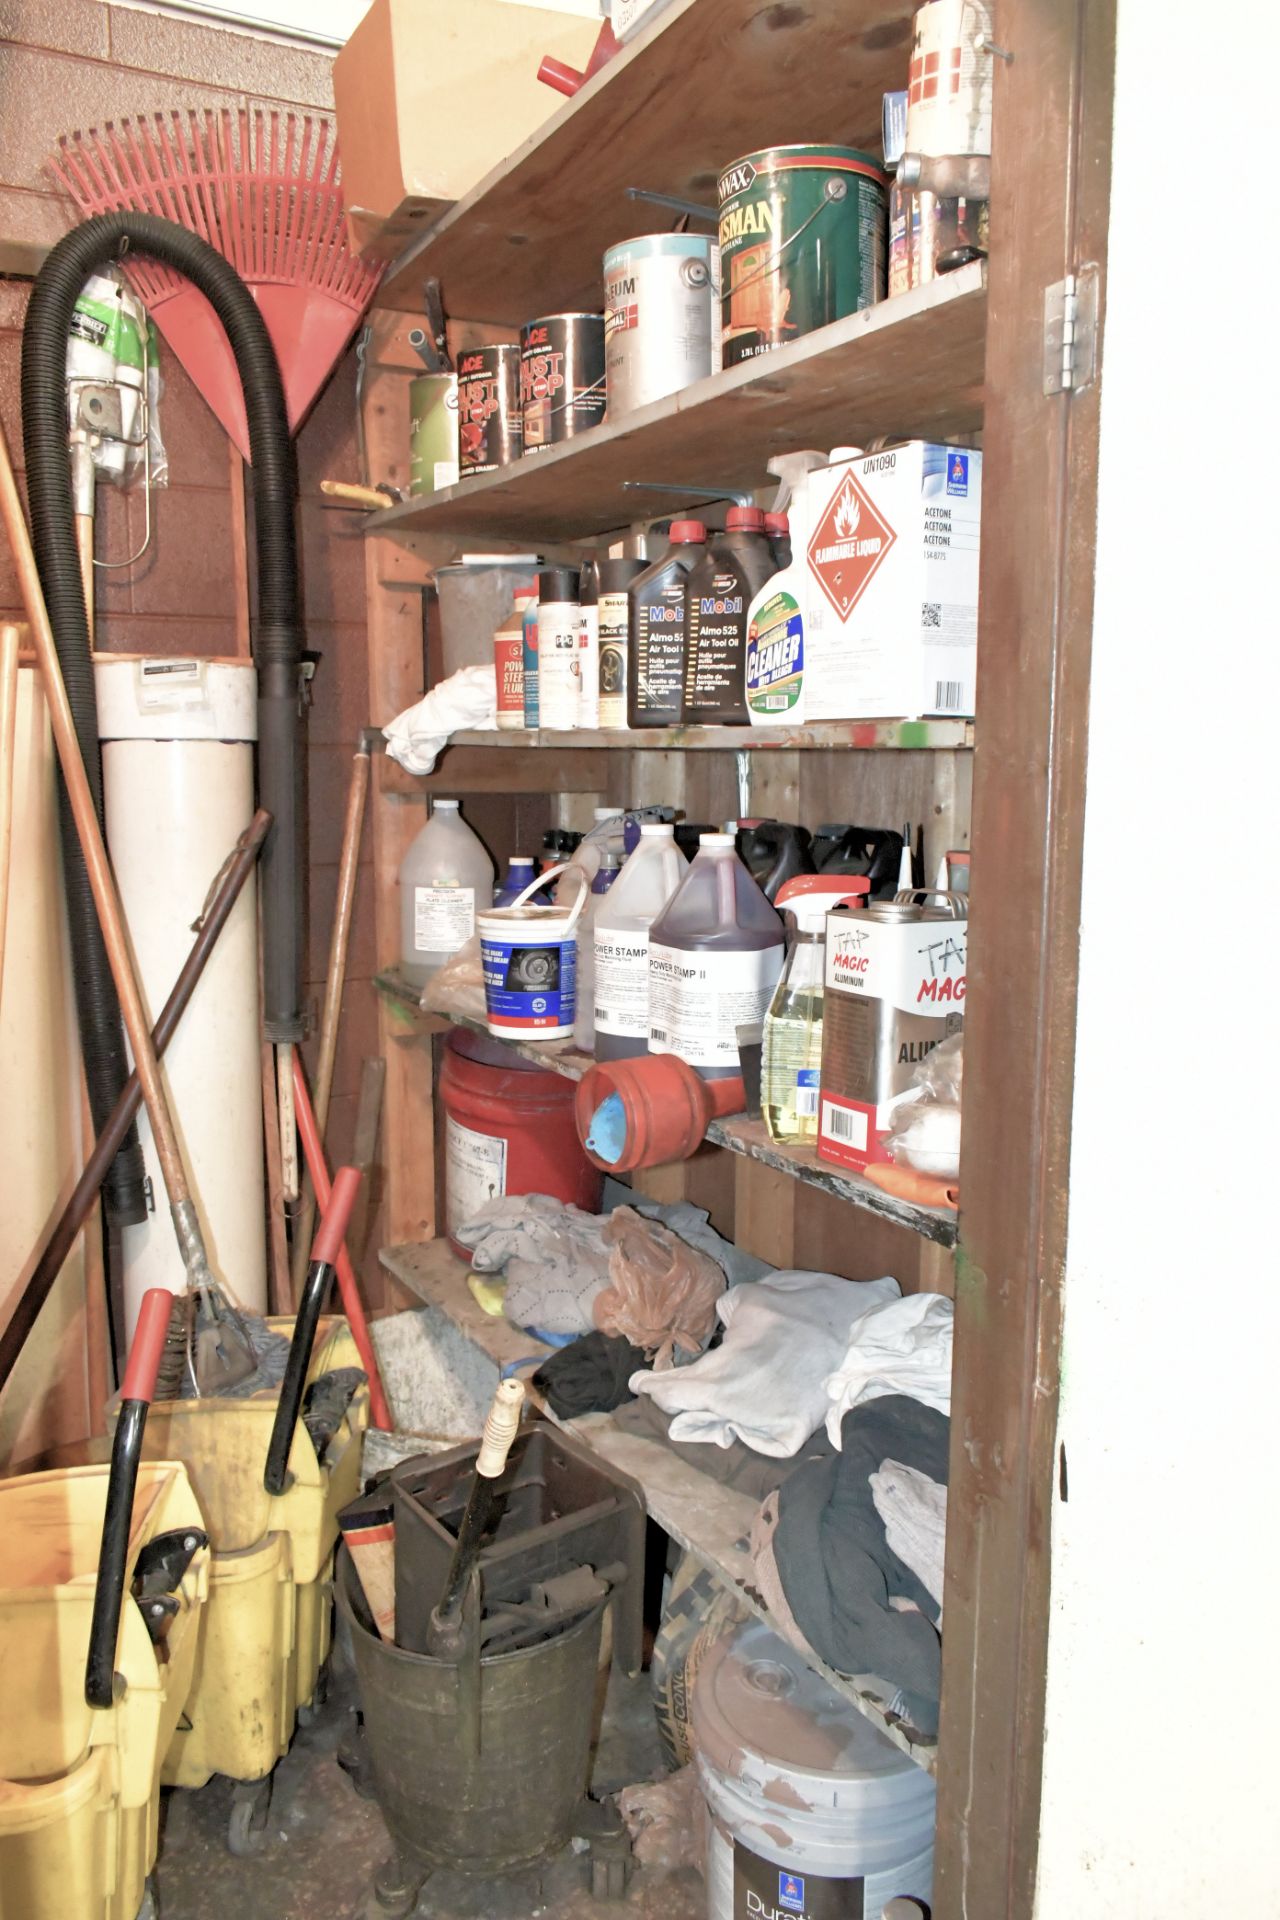 Lot-Various Cleaning Products, Air Tool Oil, Rags, Paints, Brooms, Rake, Belts, Hoses, Mop Buckets